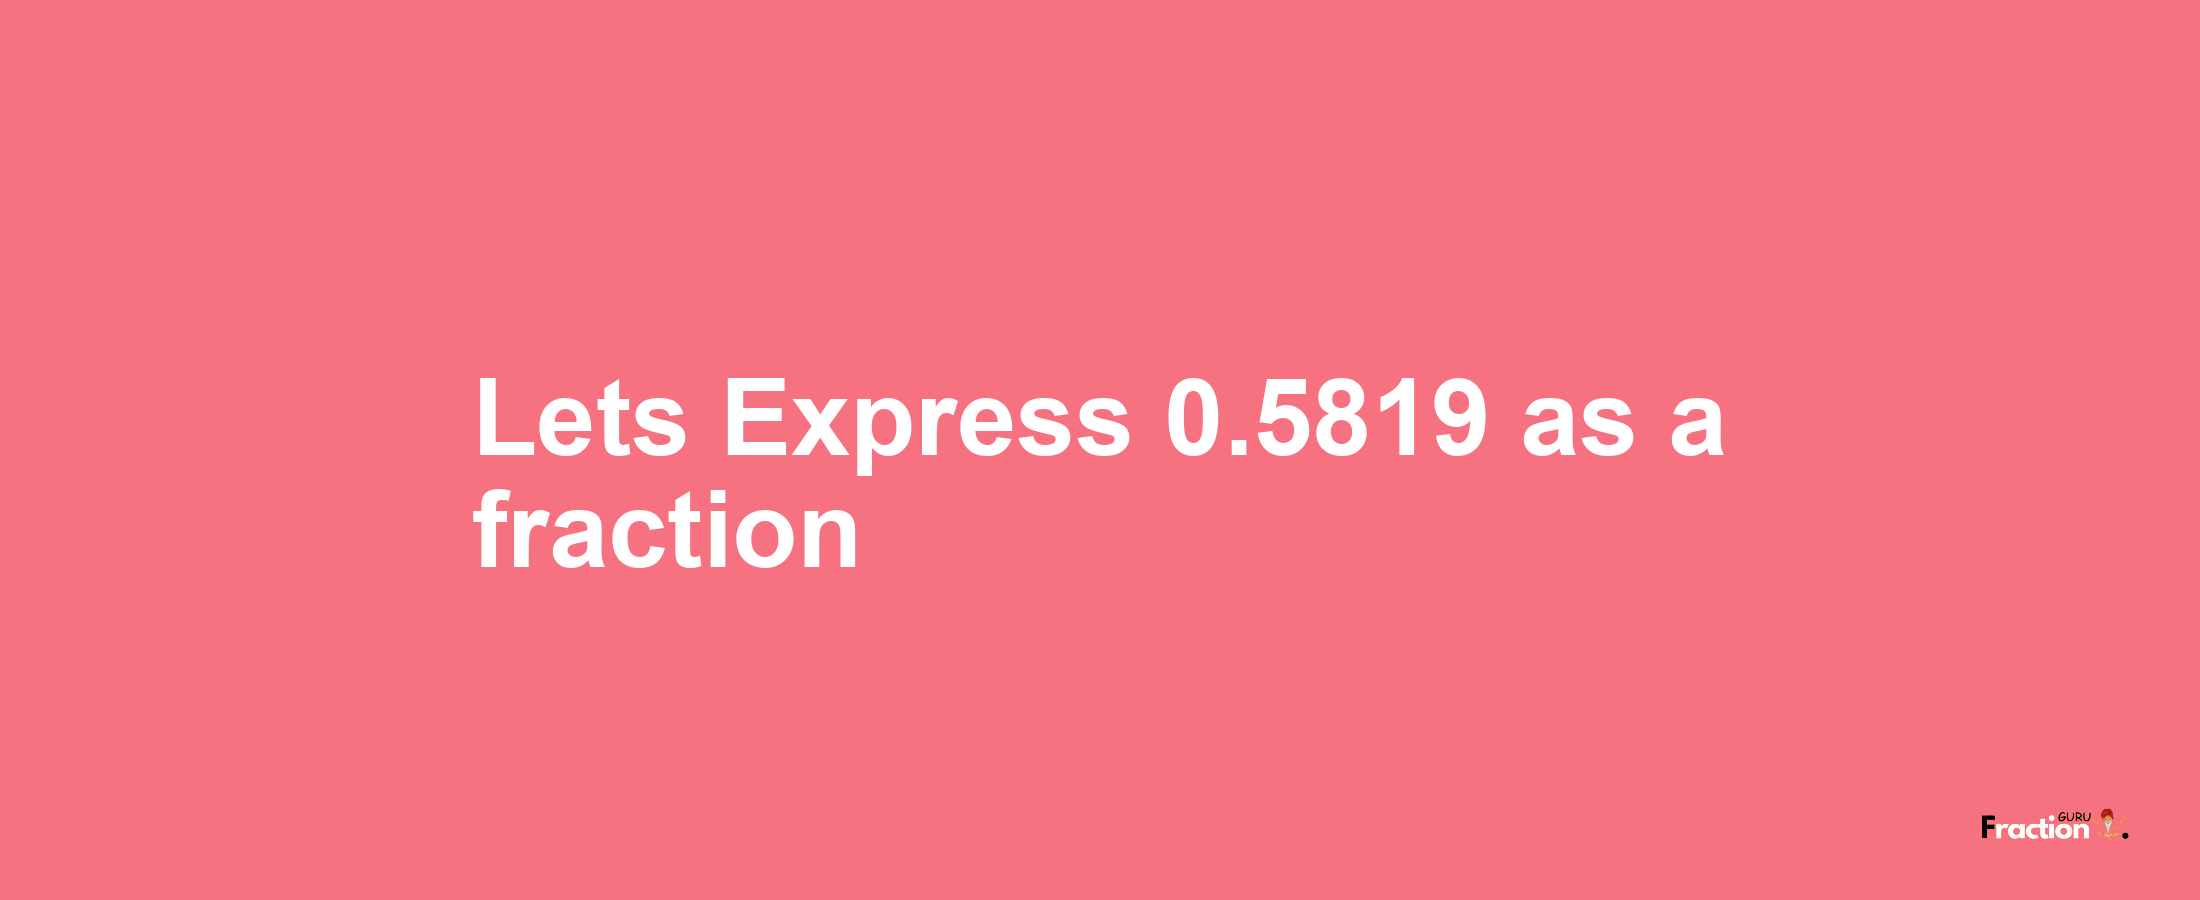 Lets Express 0.5819 as afraction